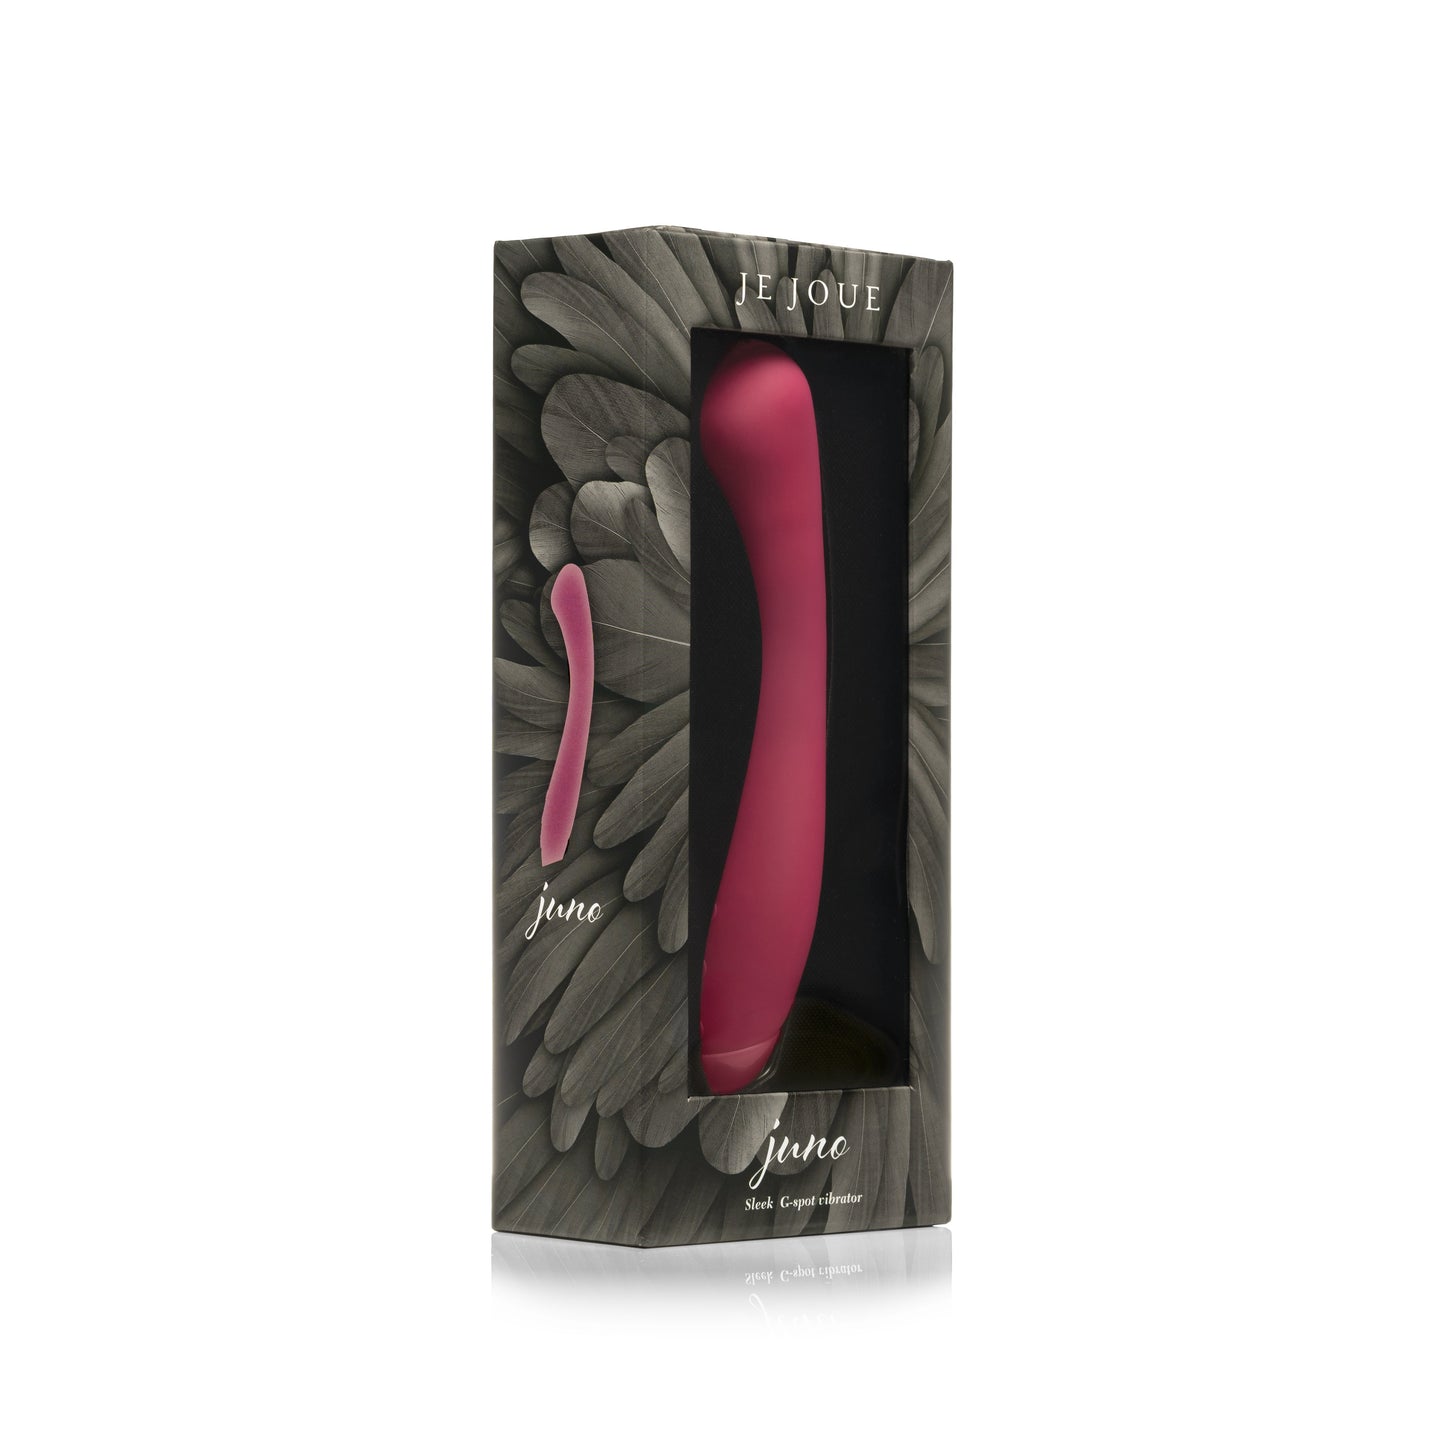 Juno G-Spot Vibrator Squishy Tip for Targeted Stimulation